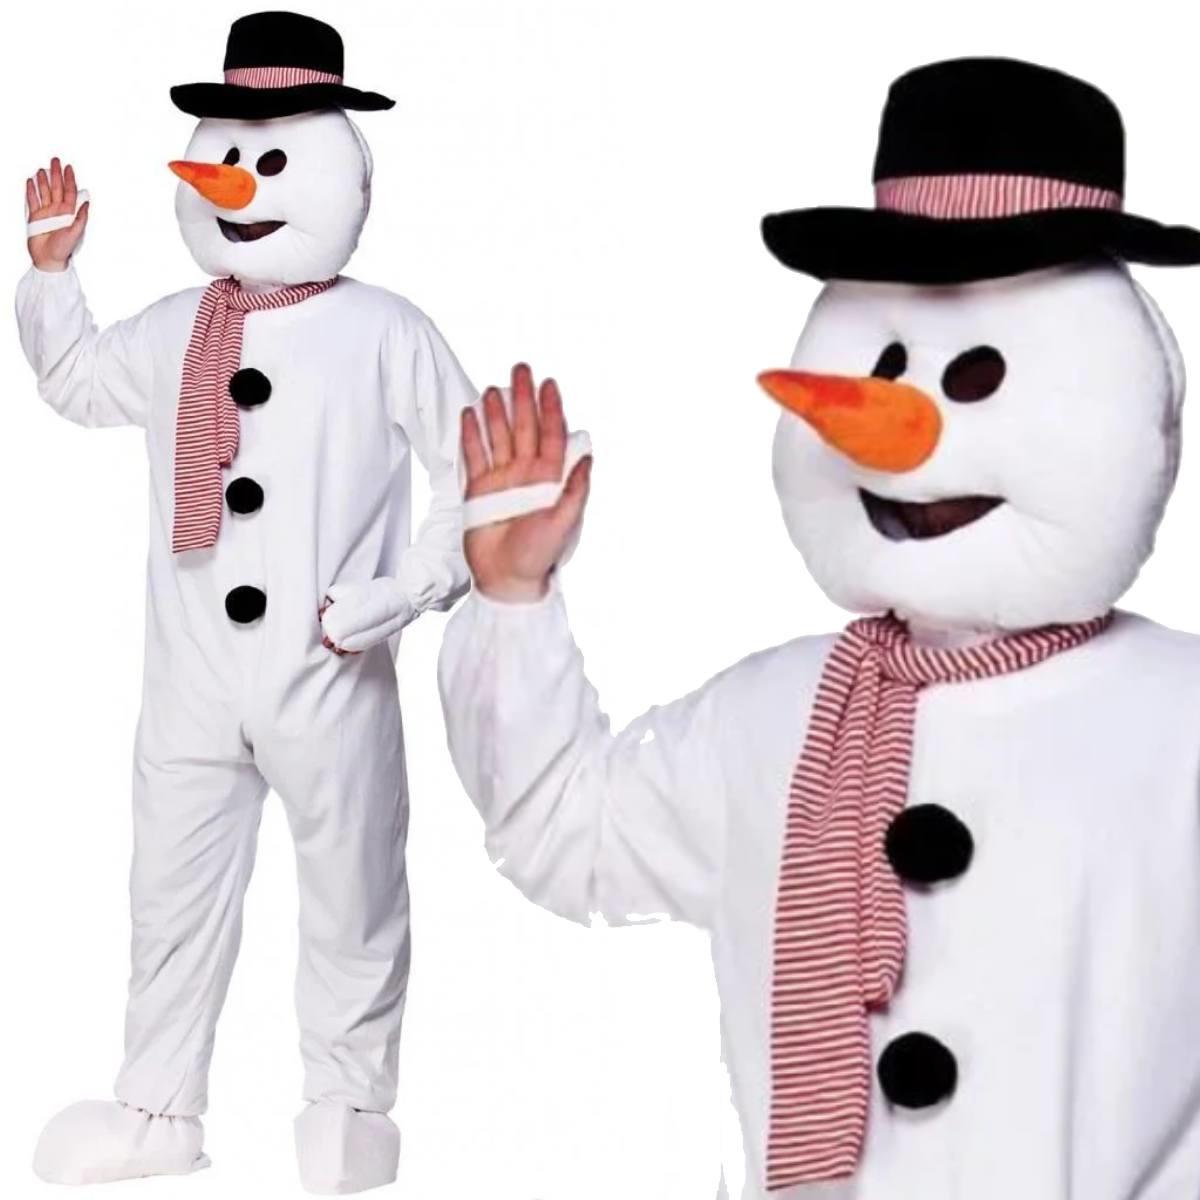 Winter Snowman Mascot Costume by Wicked MA-8558 available here at Karnival Costumes online Christmas party shop